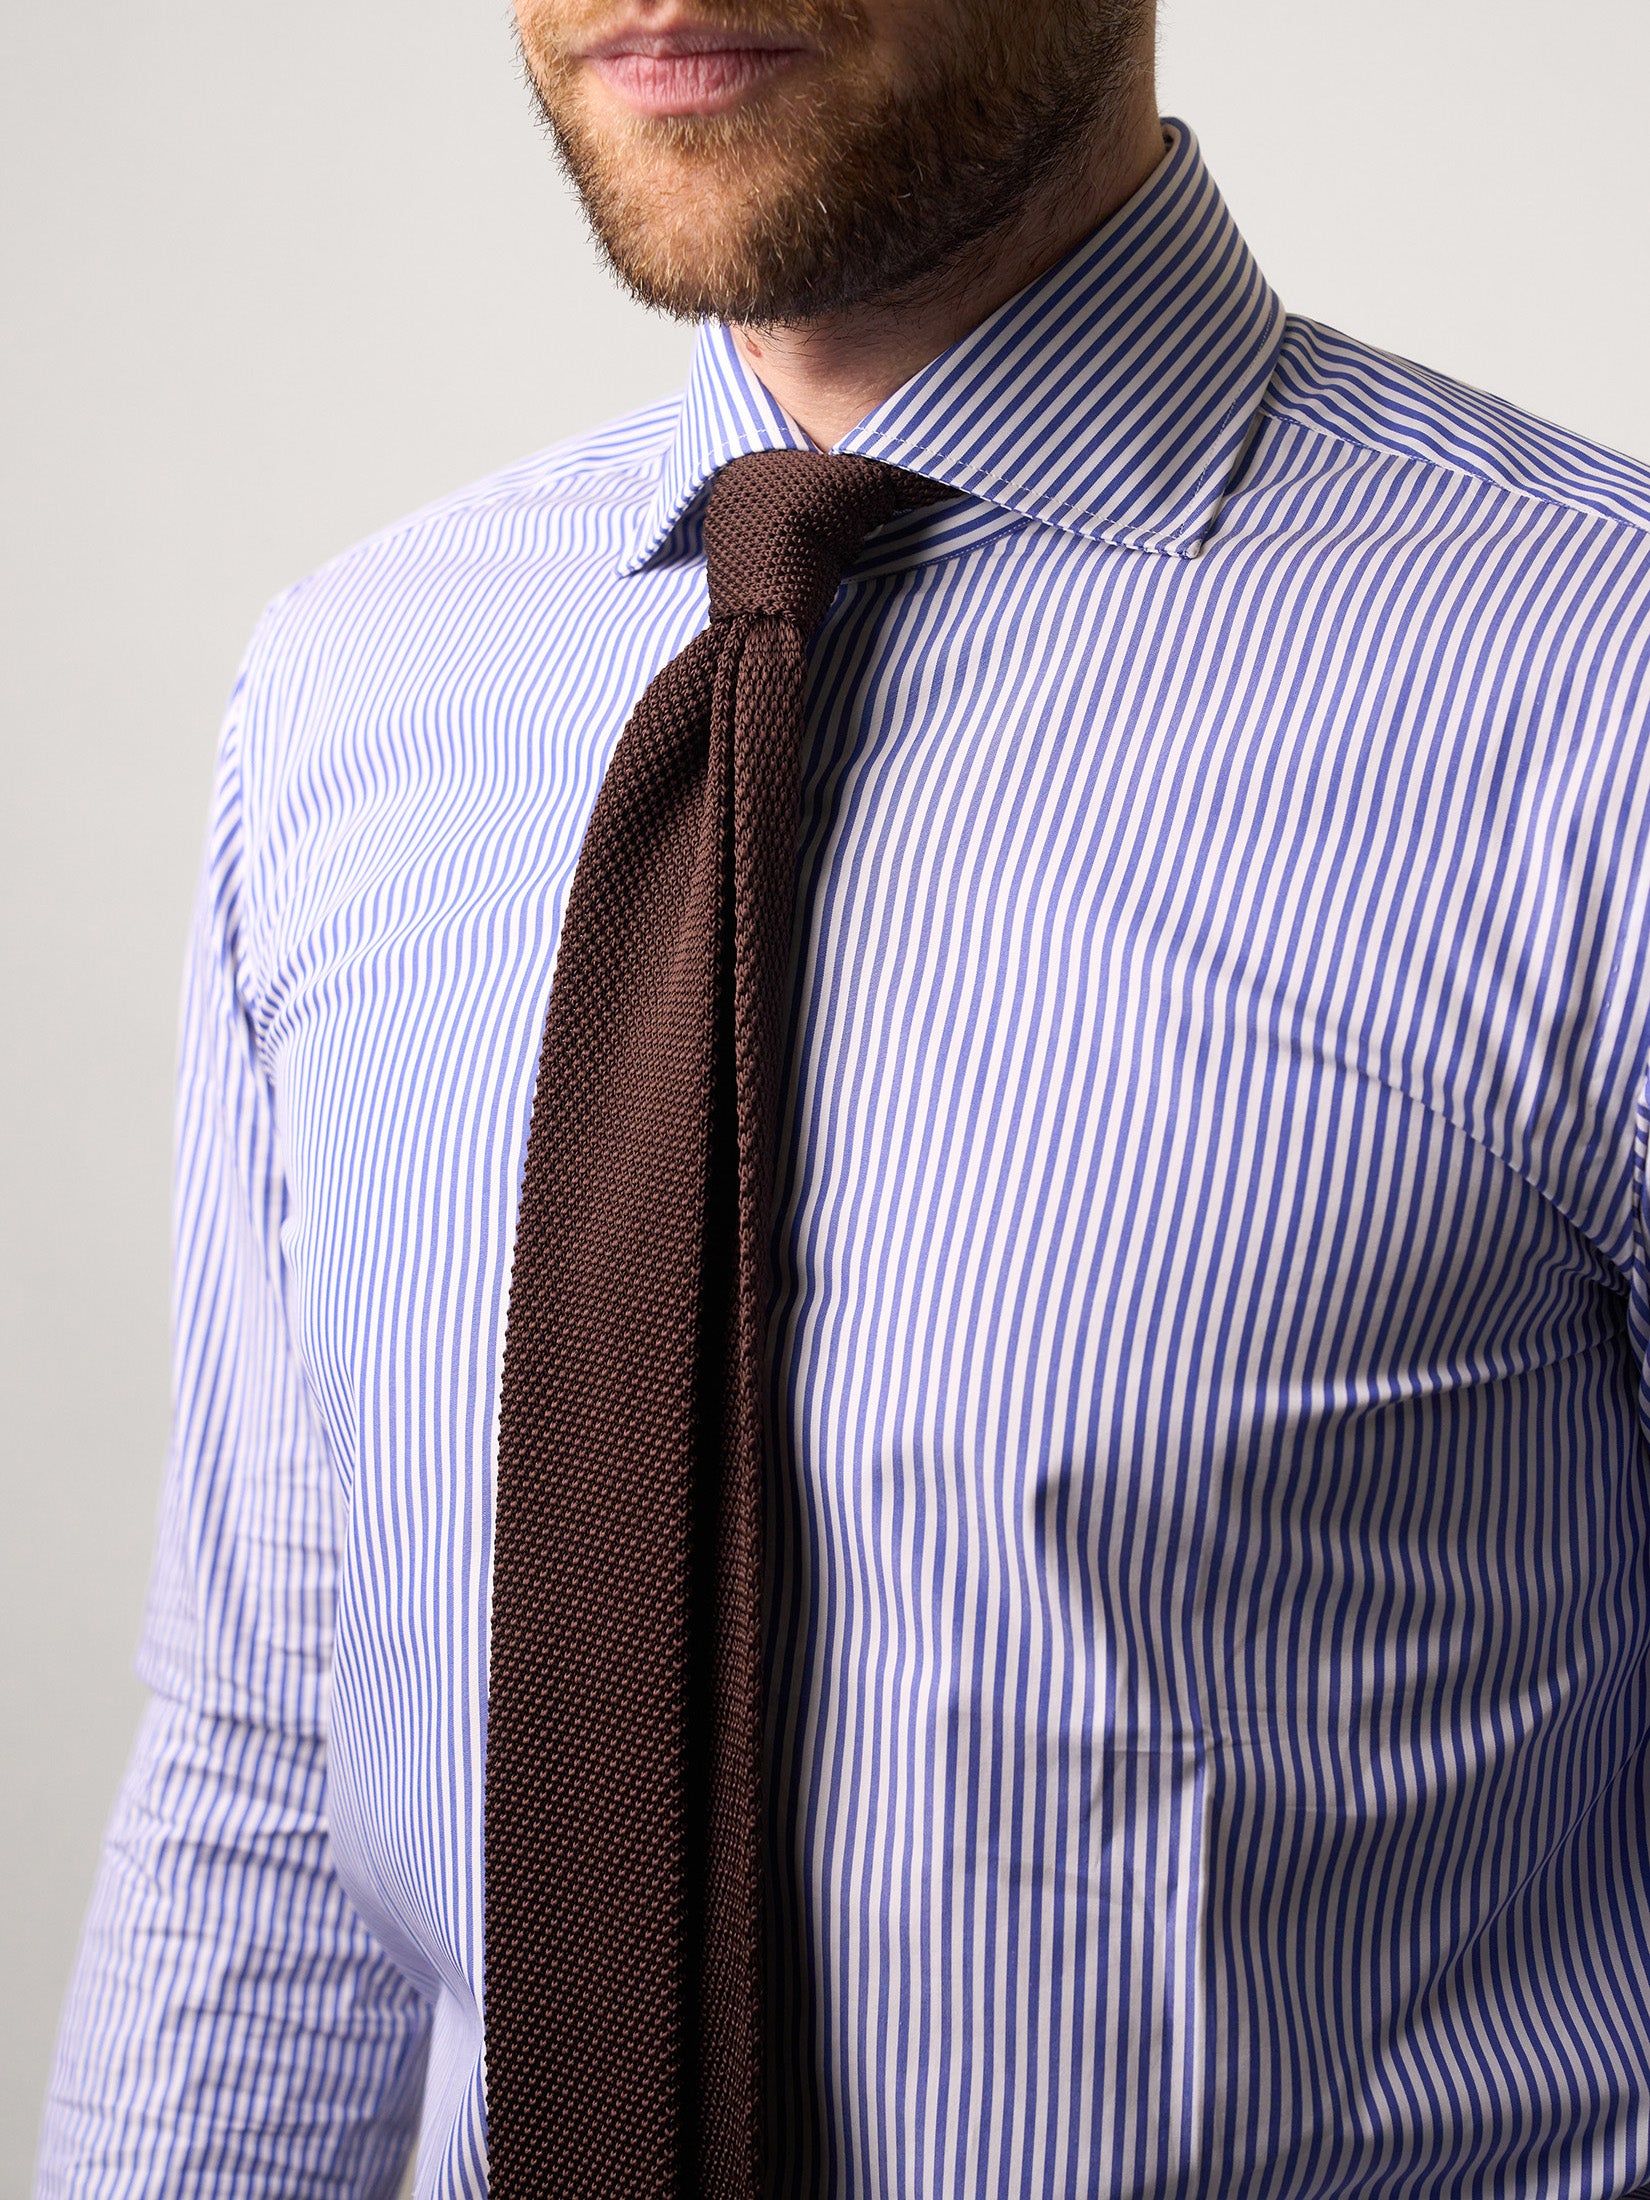 Formal Stripped White and Blue Bastoncino Shirt